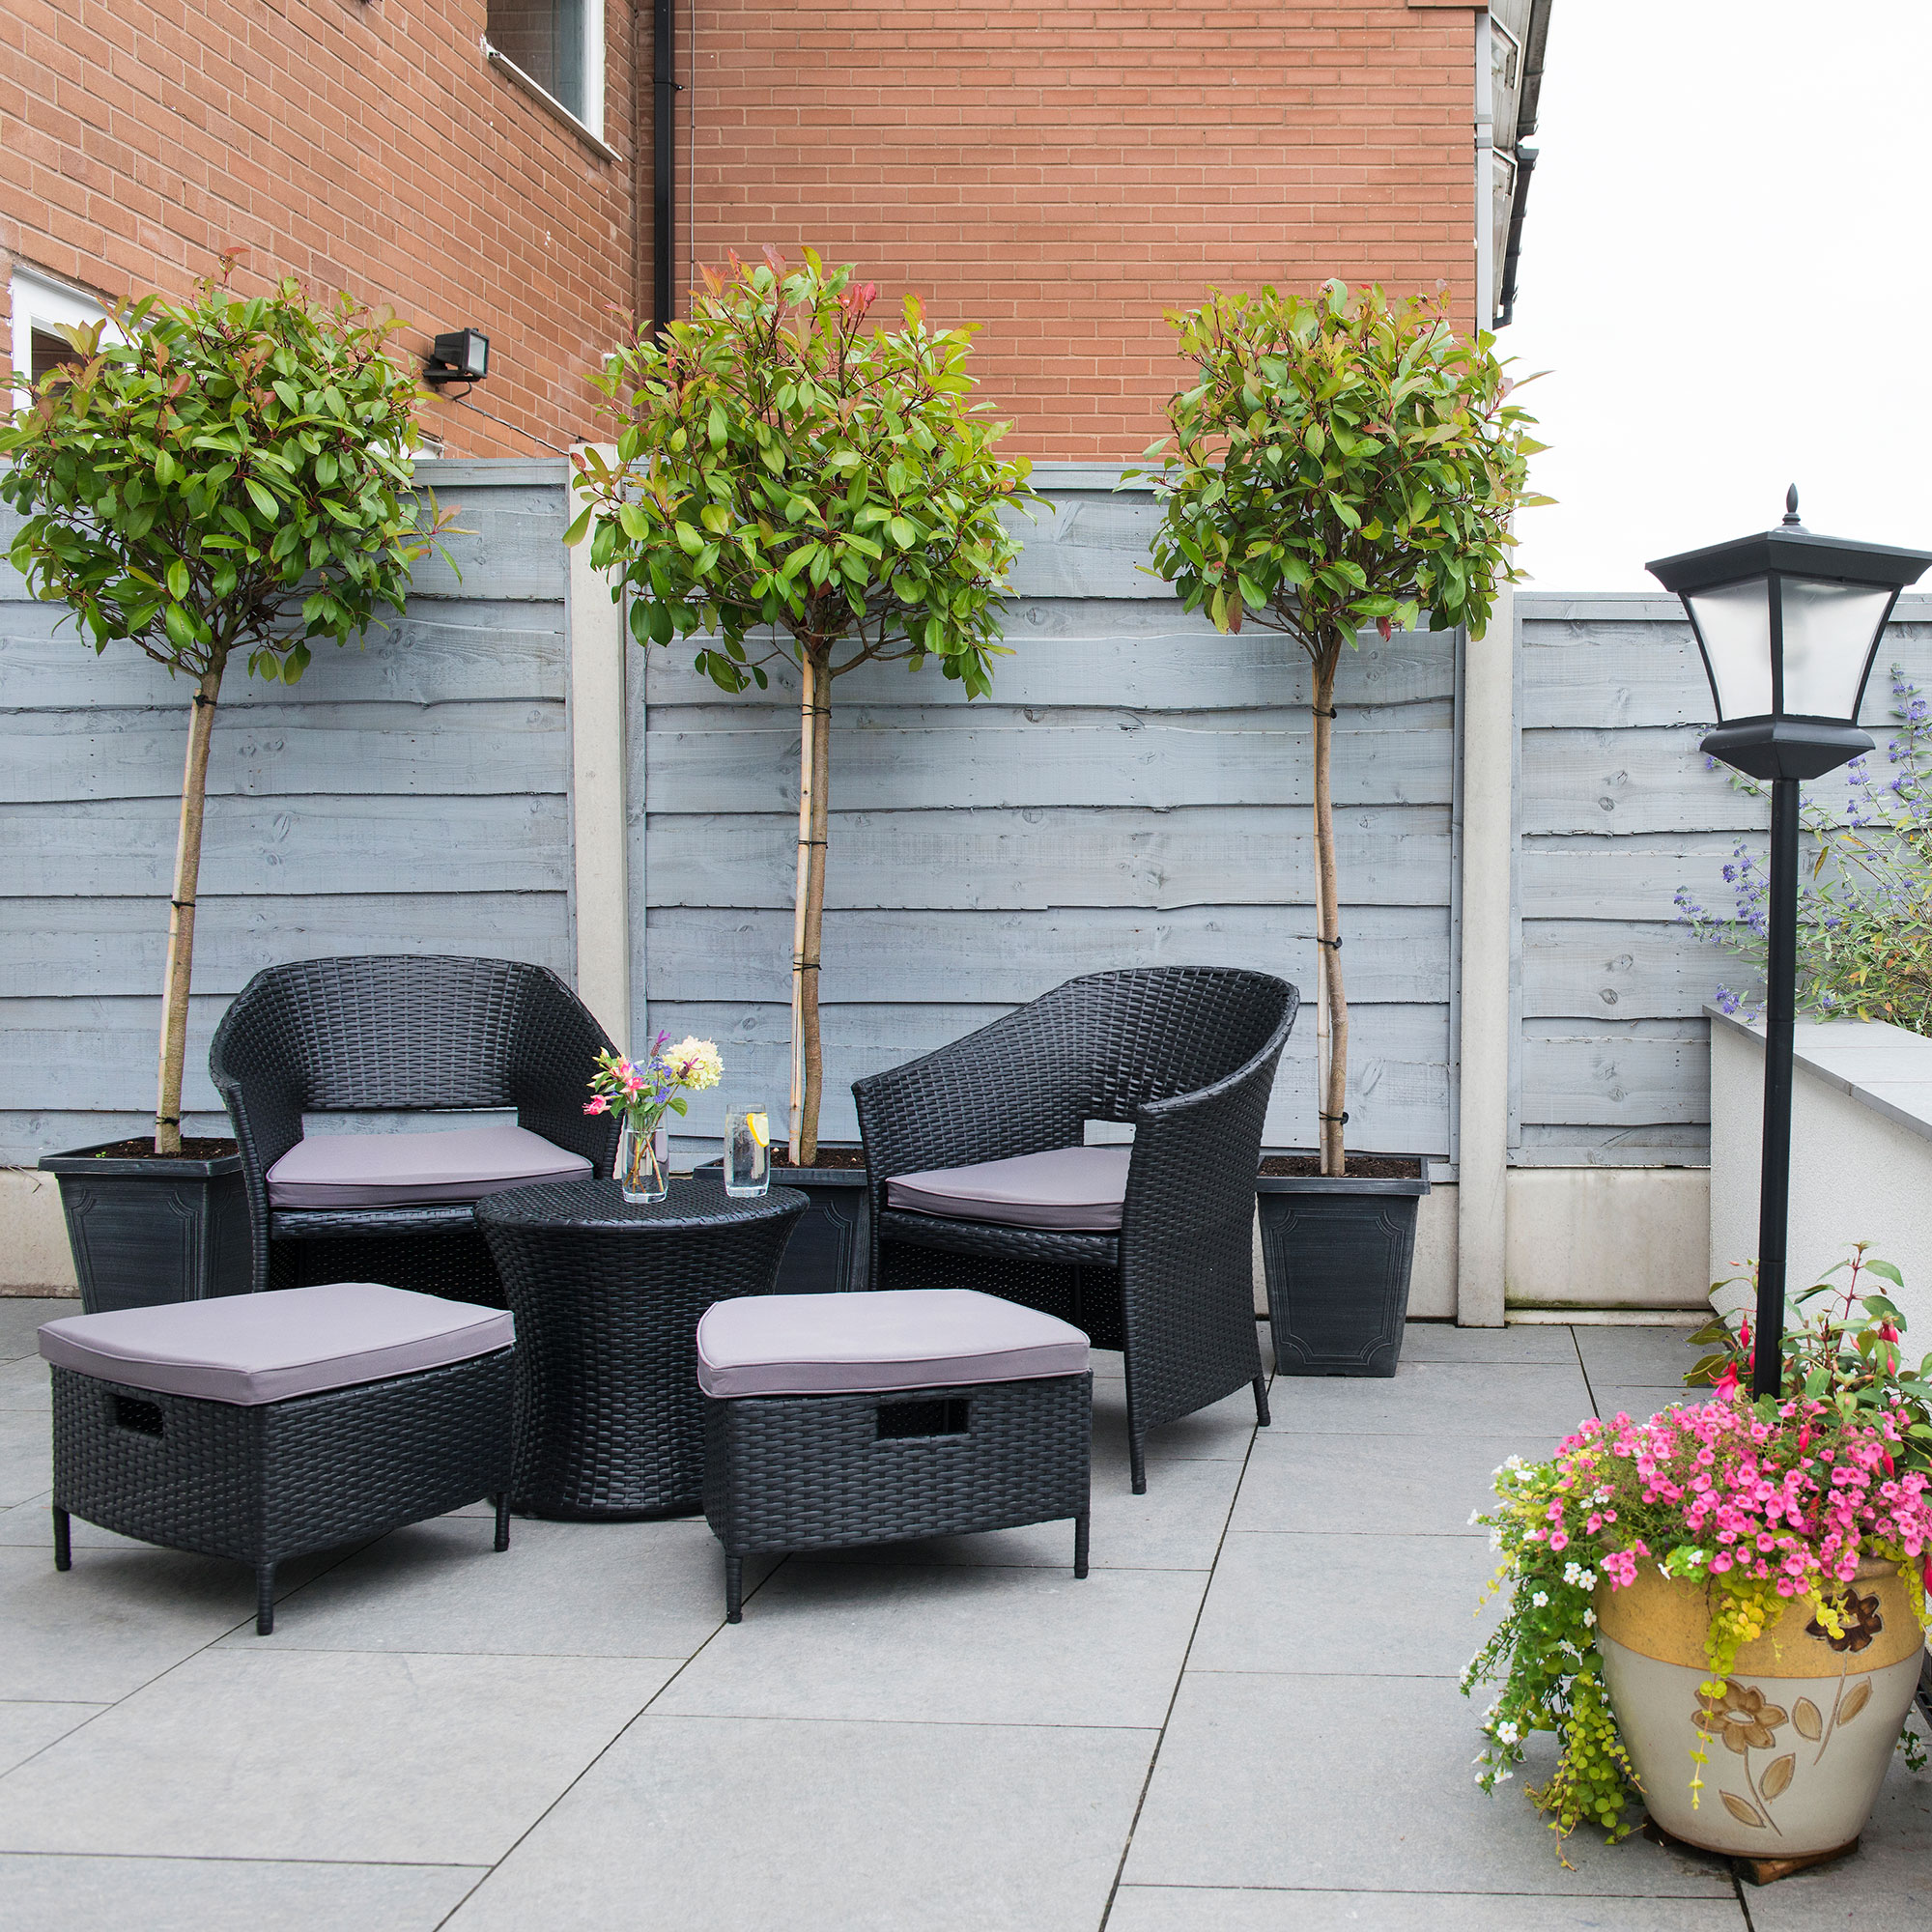 A redesigned low maintenance garden with hard landscape, Grey fencing and seats and a table, and a low wall.